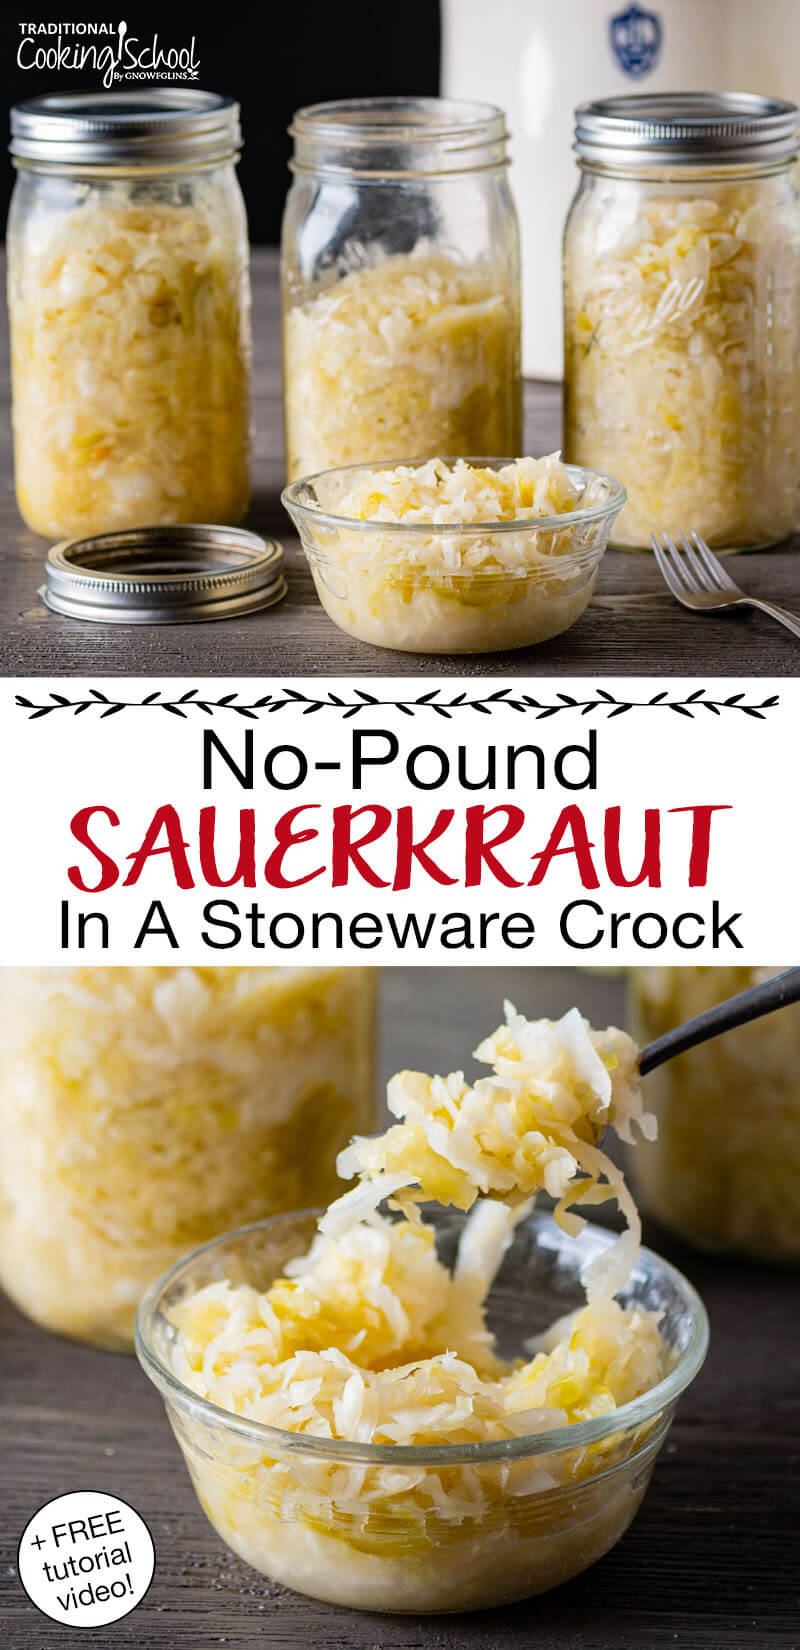 Photo collage of sauerkraut in jars and a small glass dish, including scooping up a bite of it to eat. Text overlay says: "No-Pound Sauerkraut In A Stoneware Crock (+FREE tutorial video!)"